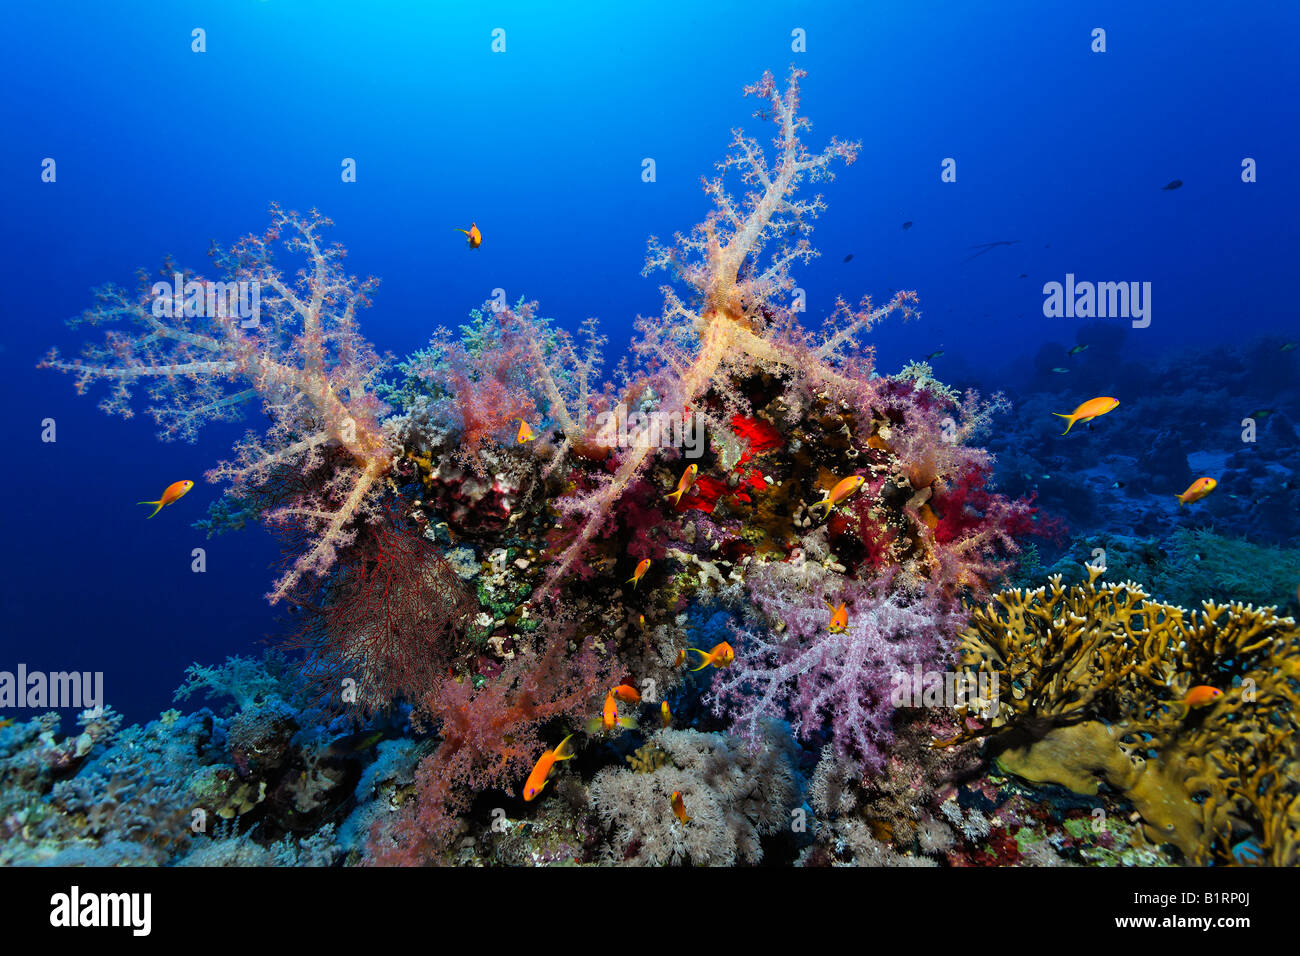 Small reef edge overgrown with various oceanic soft corals, madrepores and sponges, Hurghada, Sharm el Sheik, Red Sea, Egypt, A Stock Photo